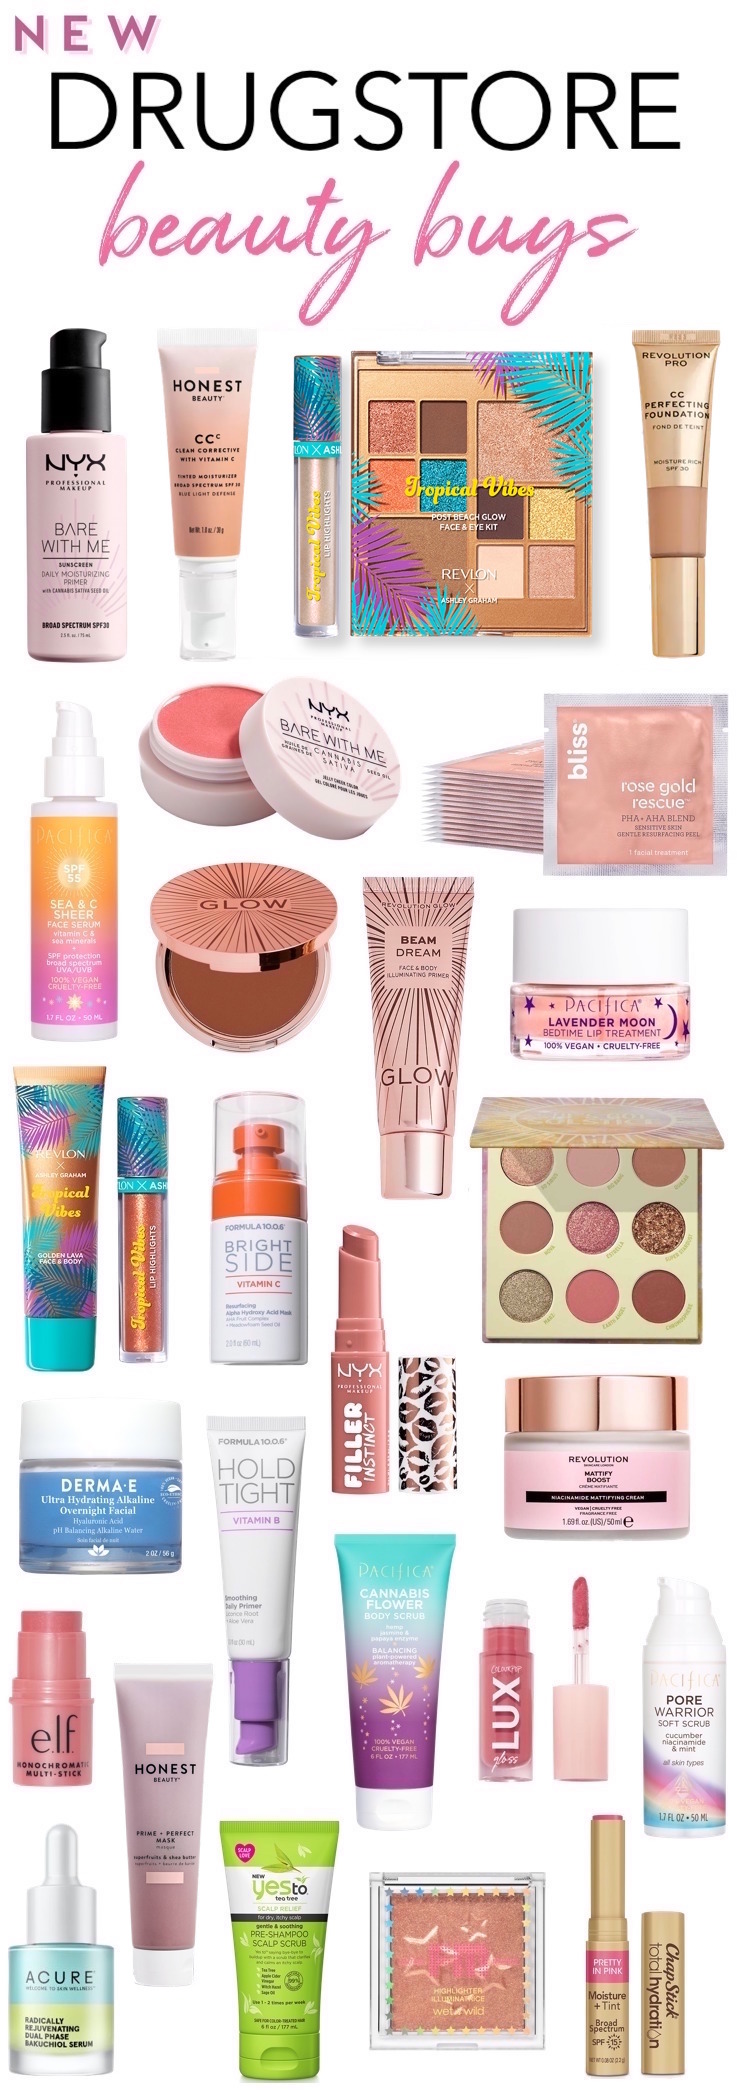 New Drugstore Makeup and Skincare Spring 2020